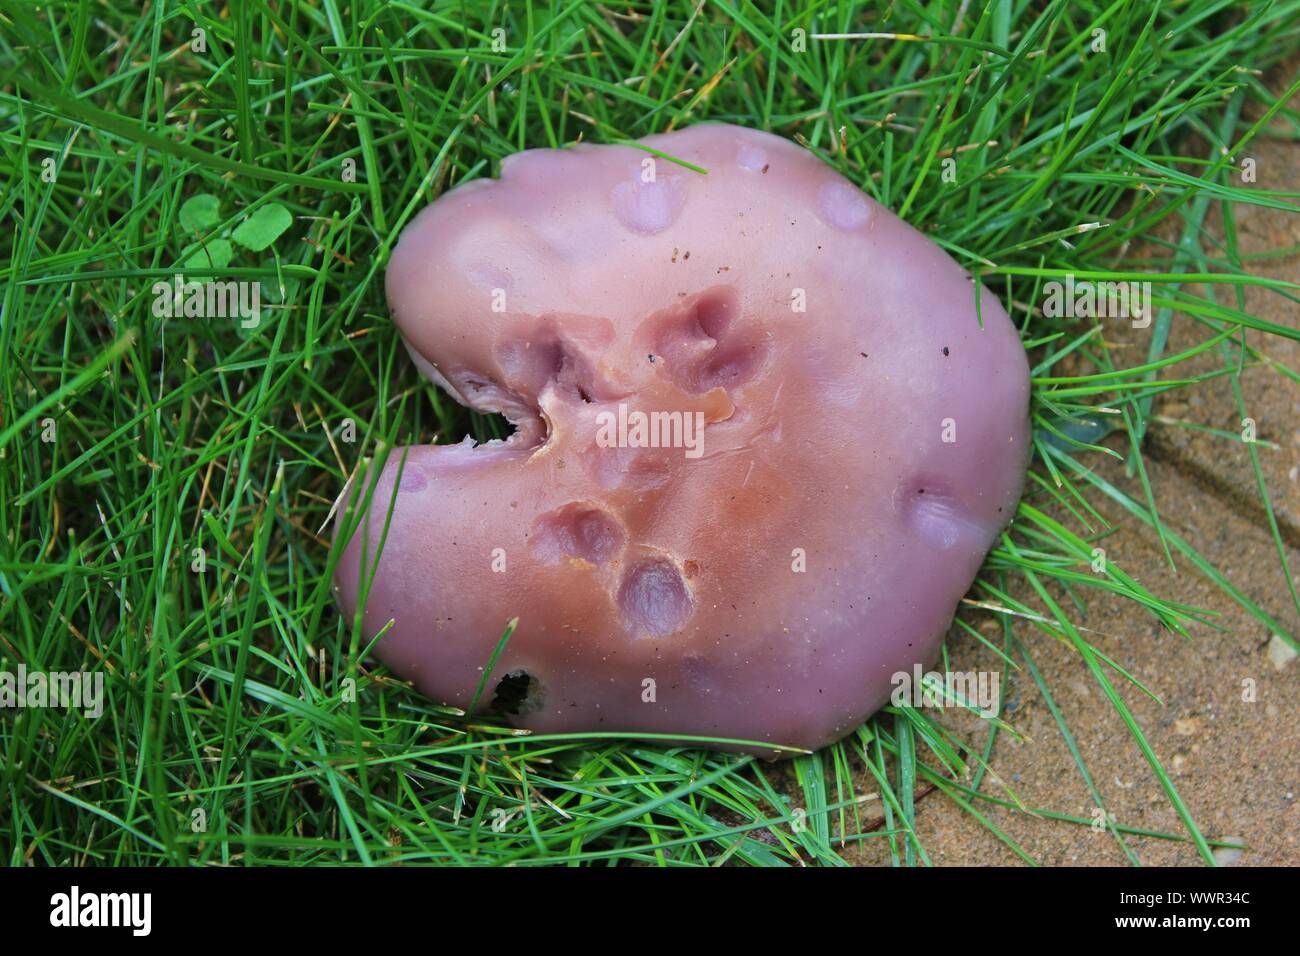 A Blewit Mushroom With Bite Marks On It Growing In The Yard Stock Photo